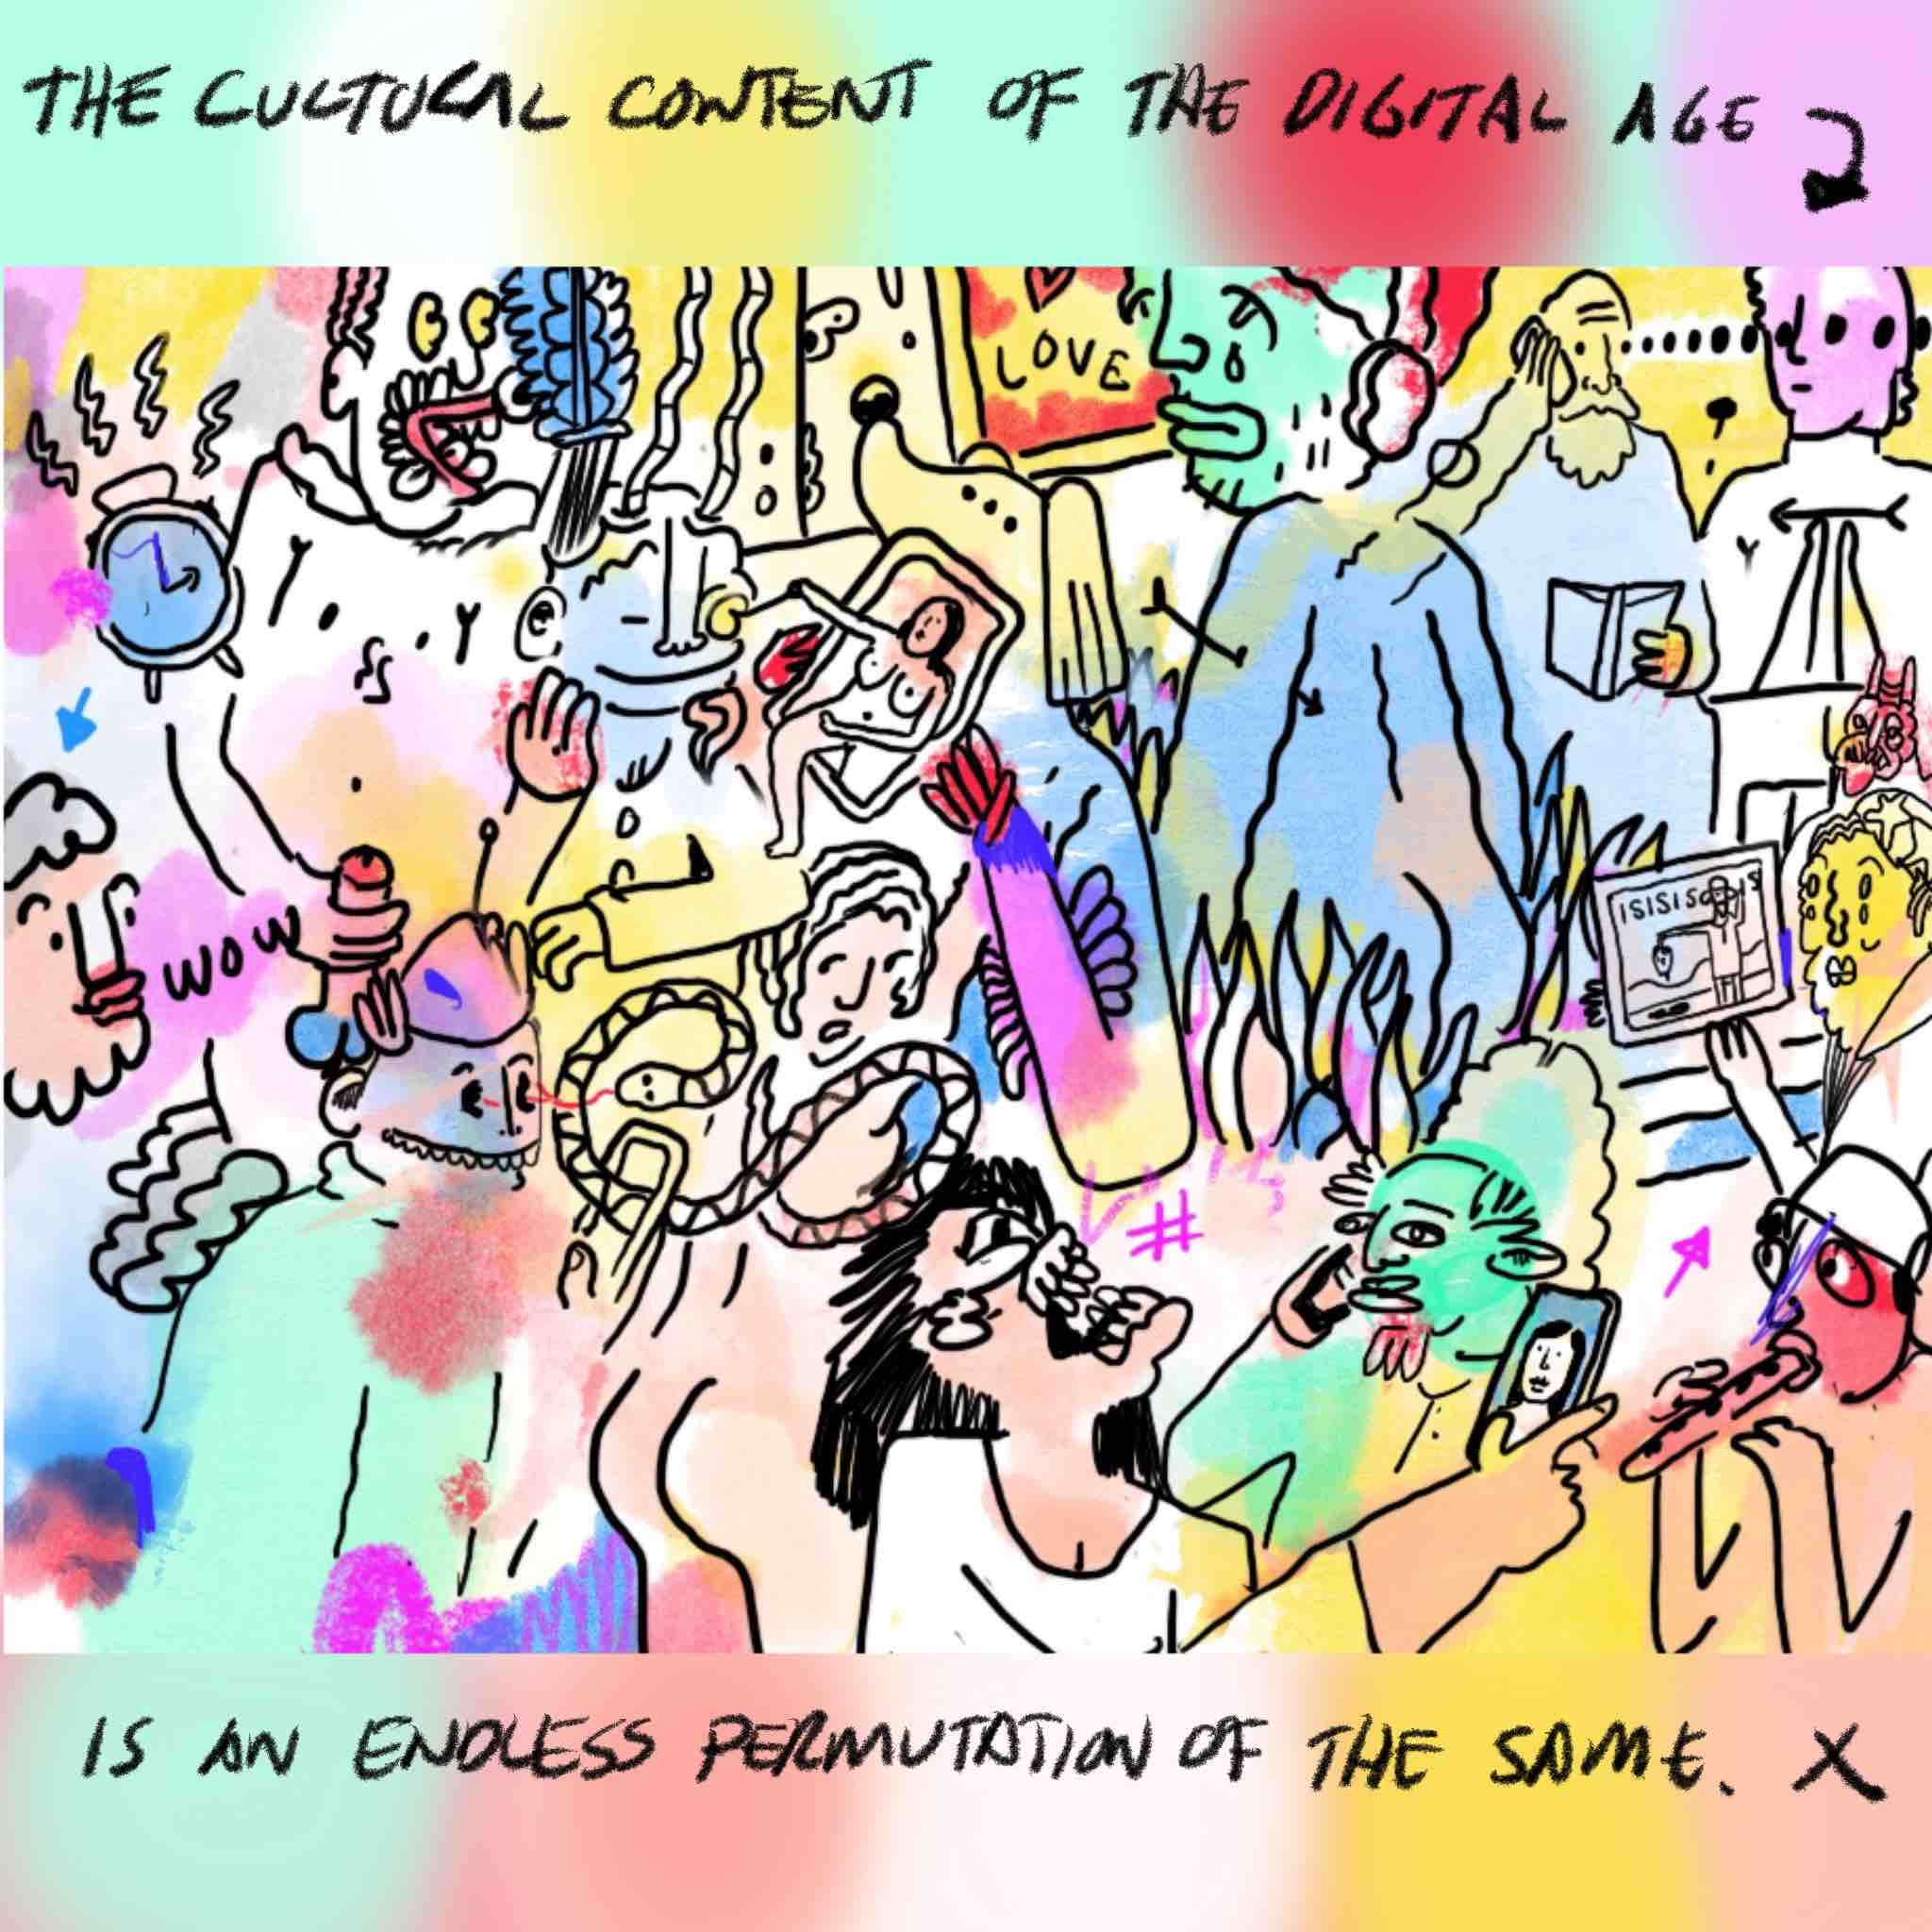 The cultural content of the digital age is an endless permutation of the same